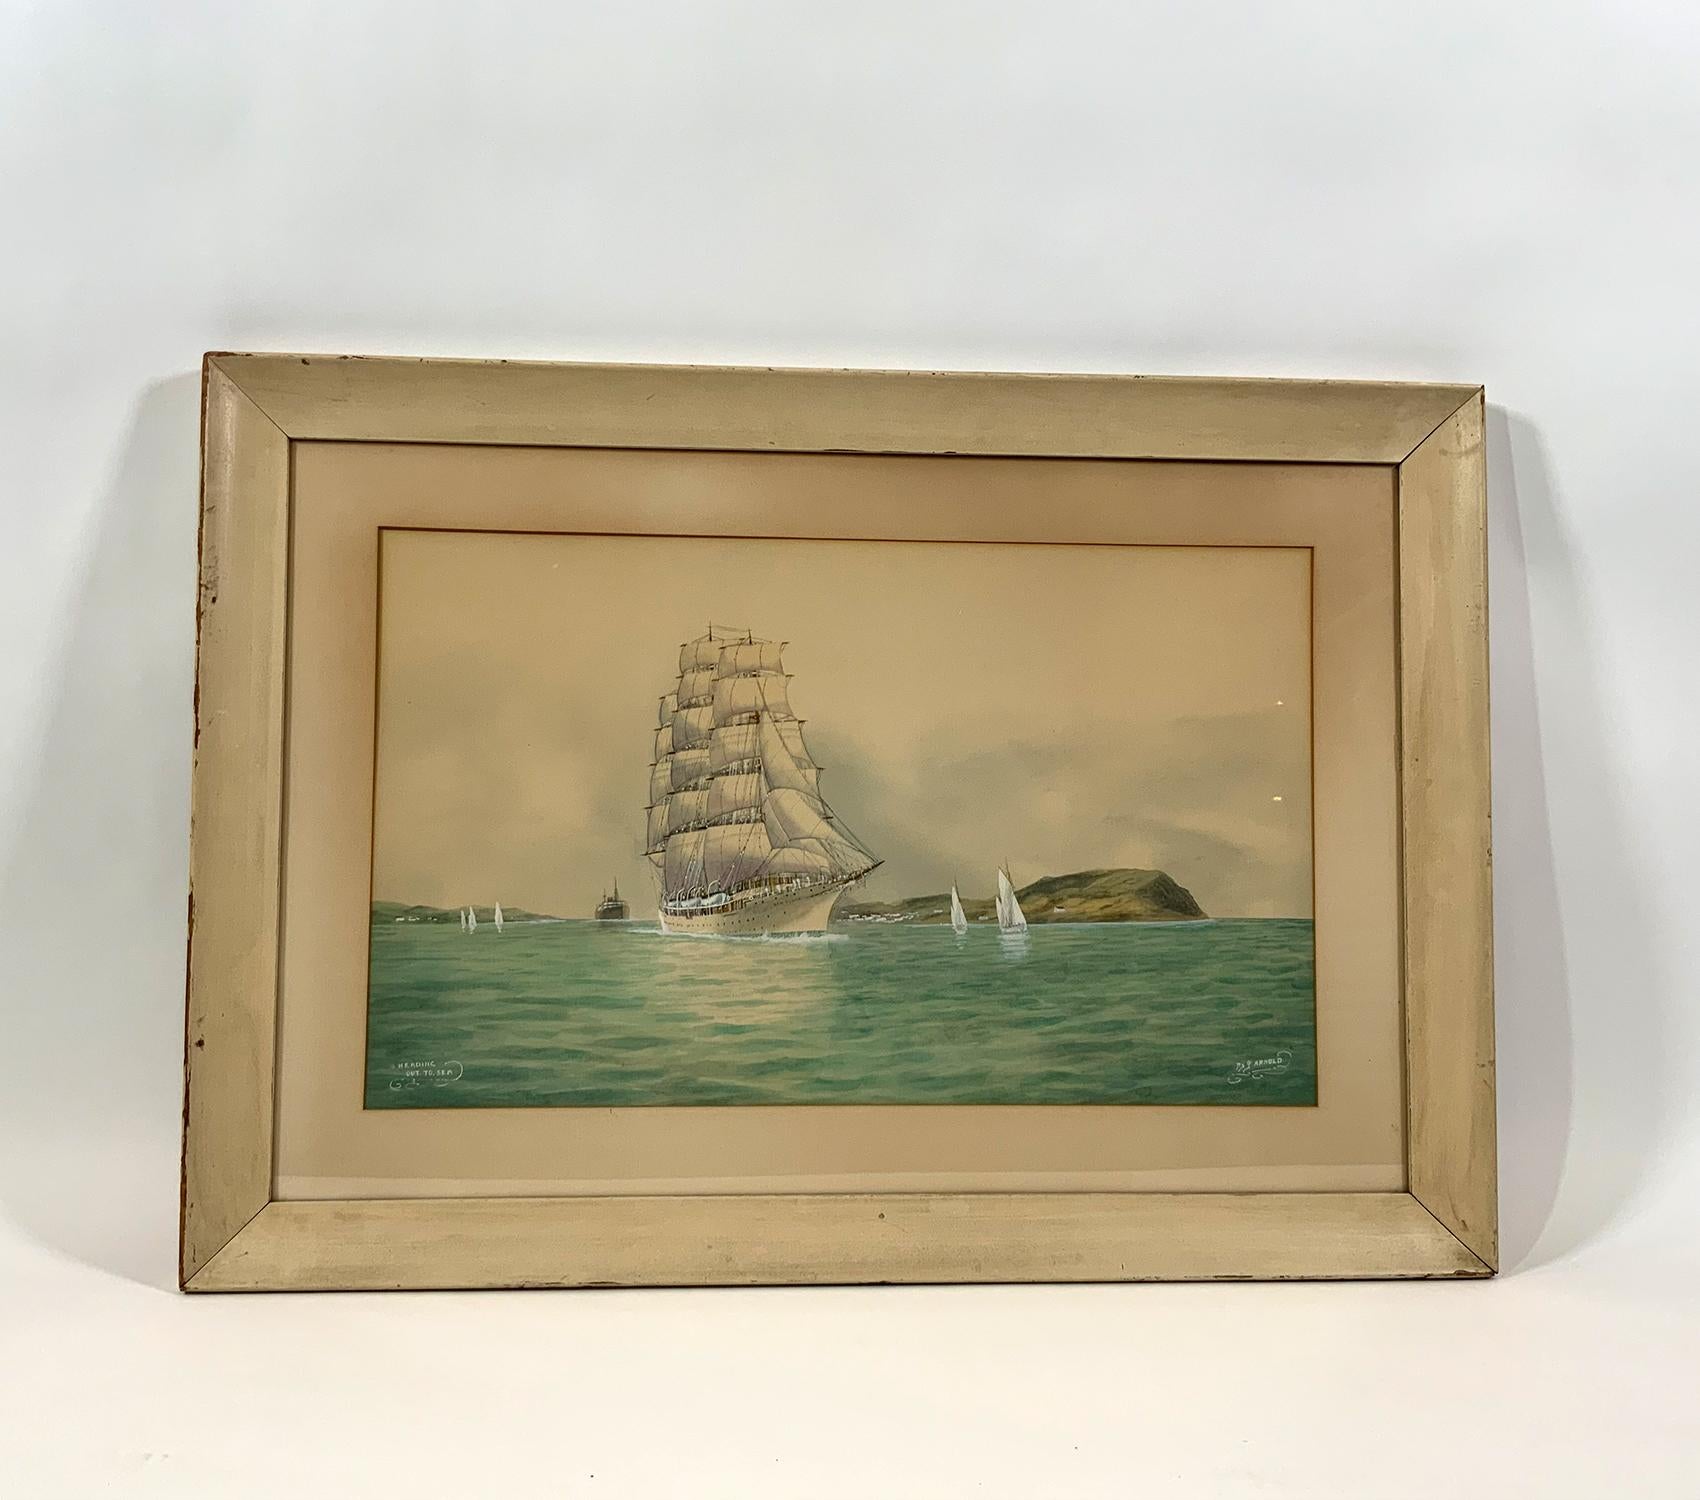 Marine watercolor by Jay Arnold titled “Heading out to Sea”. Shown is the large windjammer “Sea Cloud” under full sail leaving port. Sea Cloud was owned by Marjorie Merriweather Post and was built by Krupp in Germany, launching in 1931. The painting